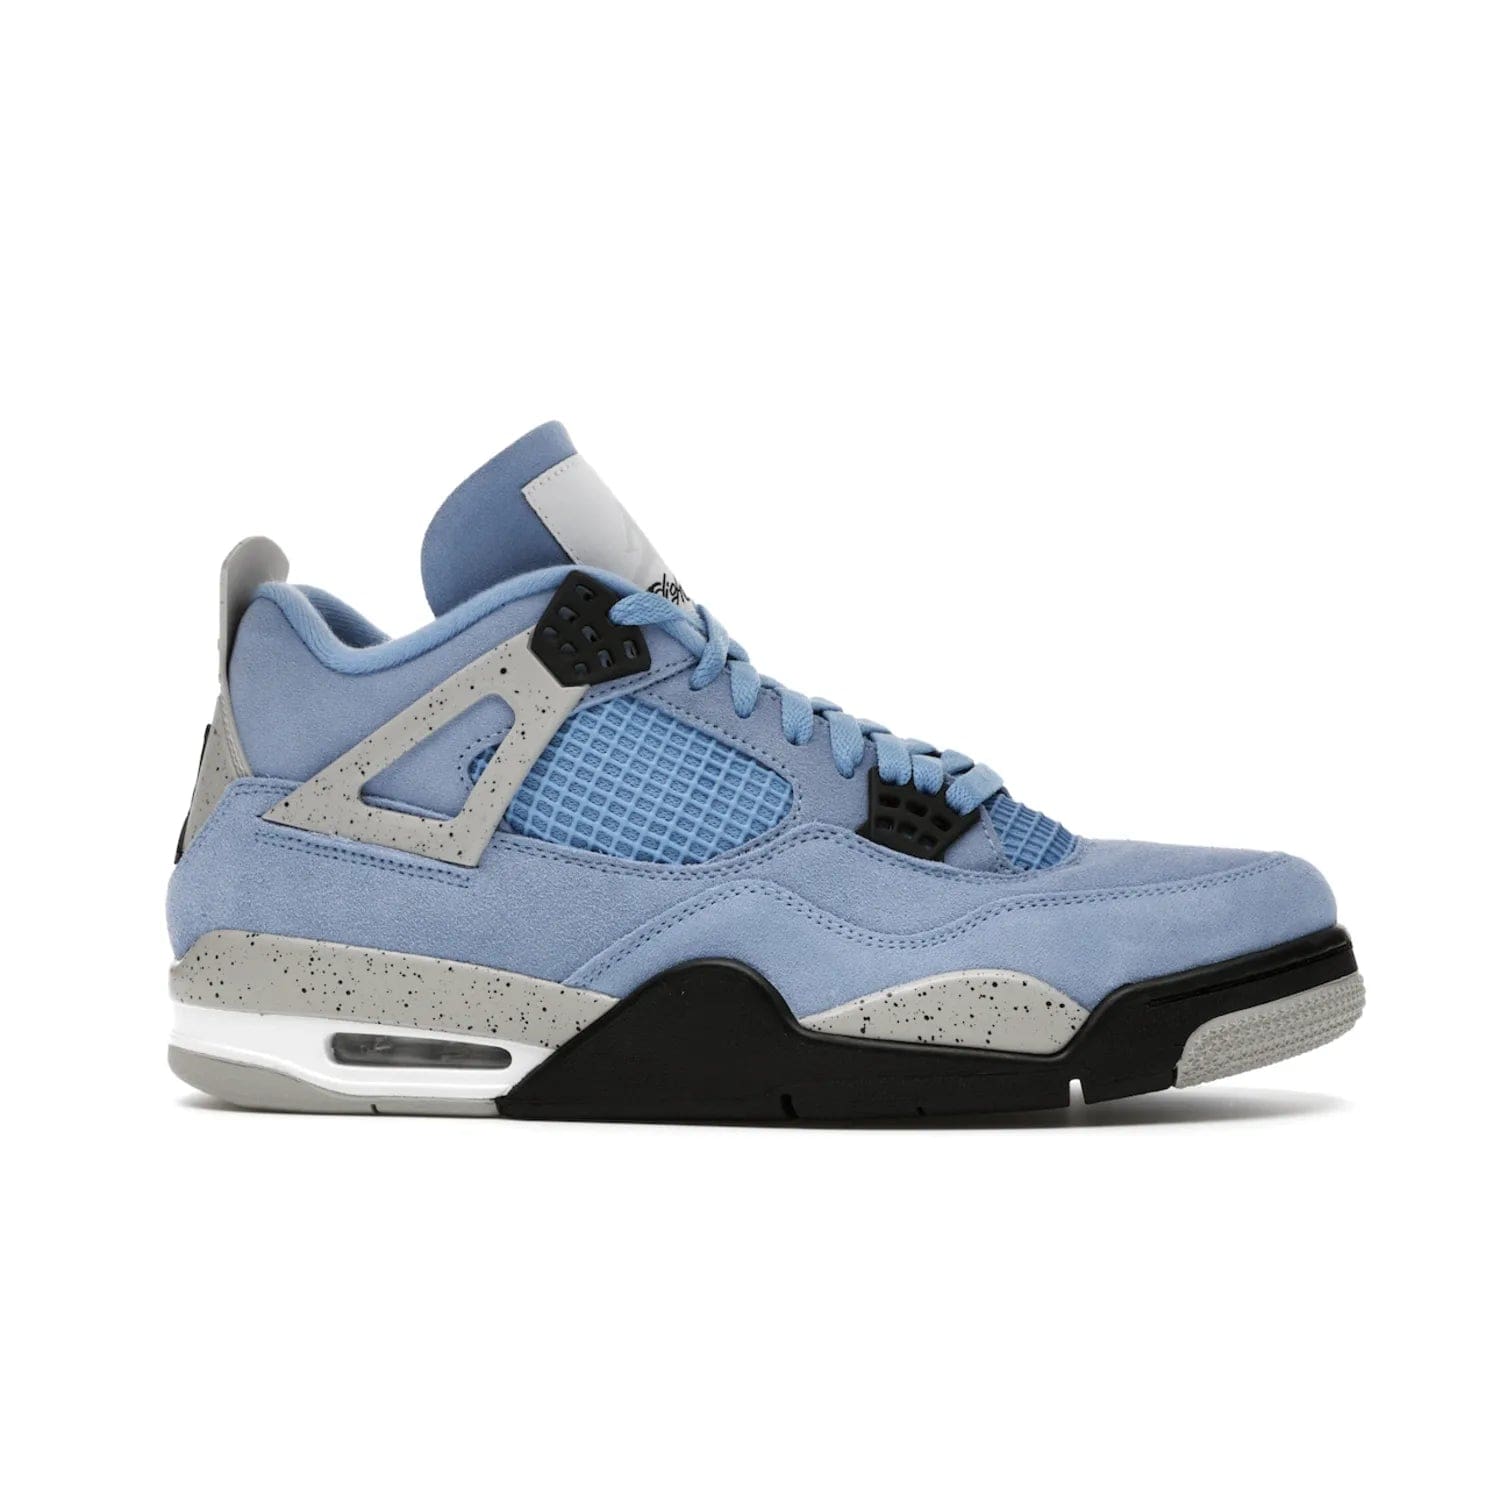 Jordan 4 Retro University Blue - Image 2 - Only at www.BallersClubKickz.com - The Air Jordan 4 University Blue honors MJ's alma mater. Rich University Blue suede, panels of netting, and Cement Grey speckled eyelets give this design an edgy look. Features a black, white and Tech Grey sole with a clear Air unit and two woven labels on the tongue. Jumpman logo & Team Jordan jock tag included. Released April 2021.